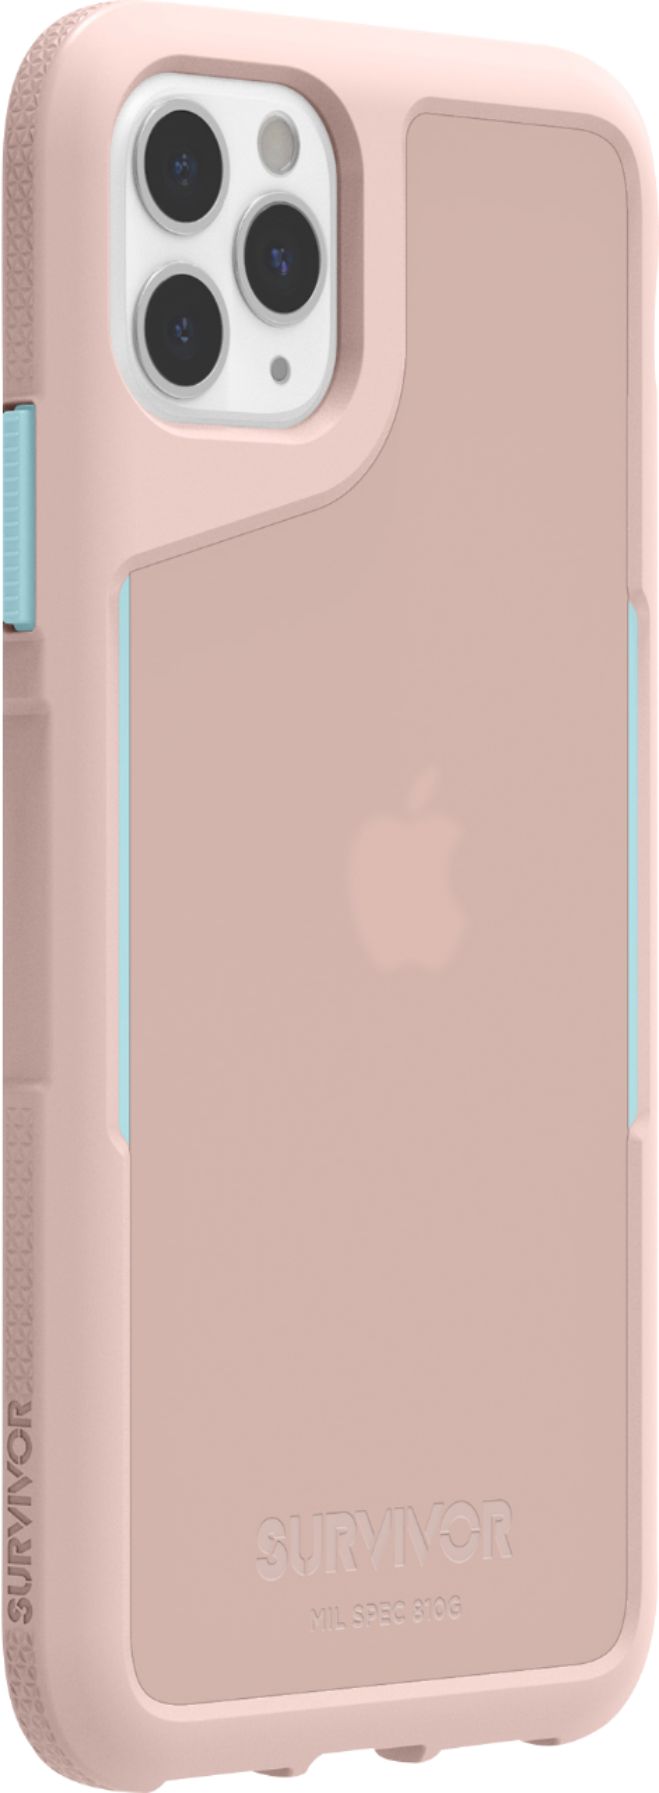 Angle View: Griffin Technology - Survivor Endurance Case for Apple® iPhone® 11 Pro Max - Blue/Translucent/Pink